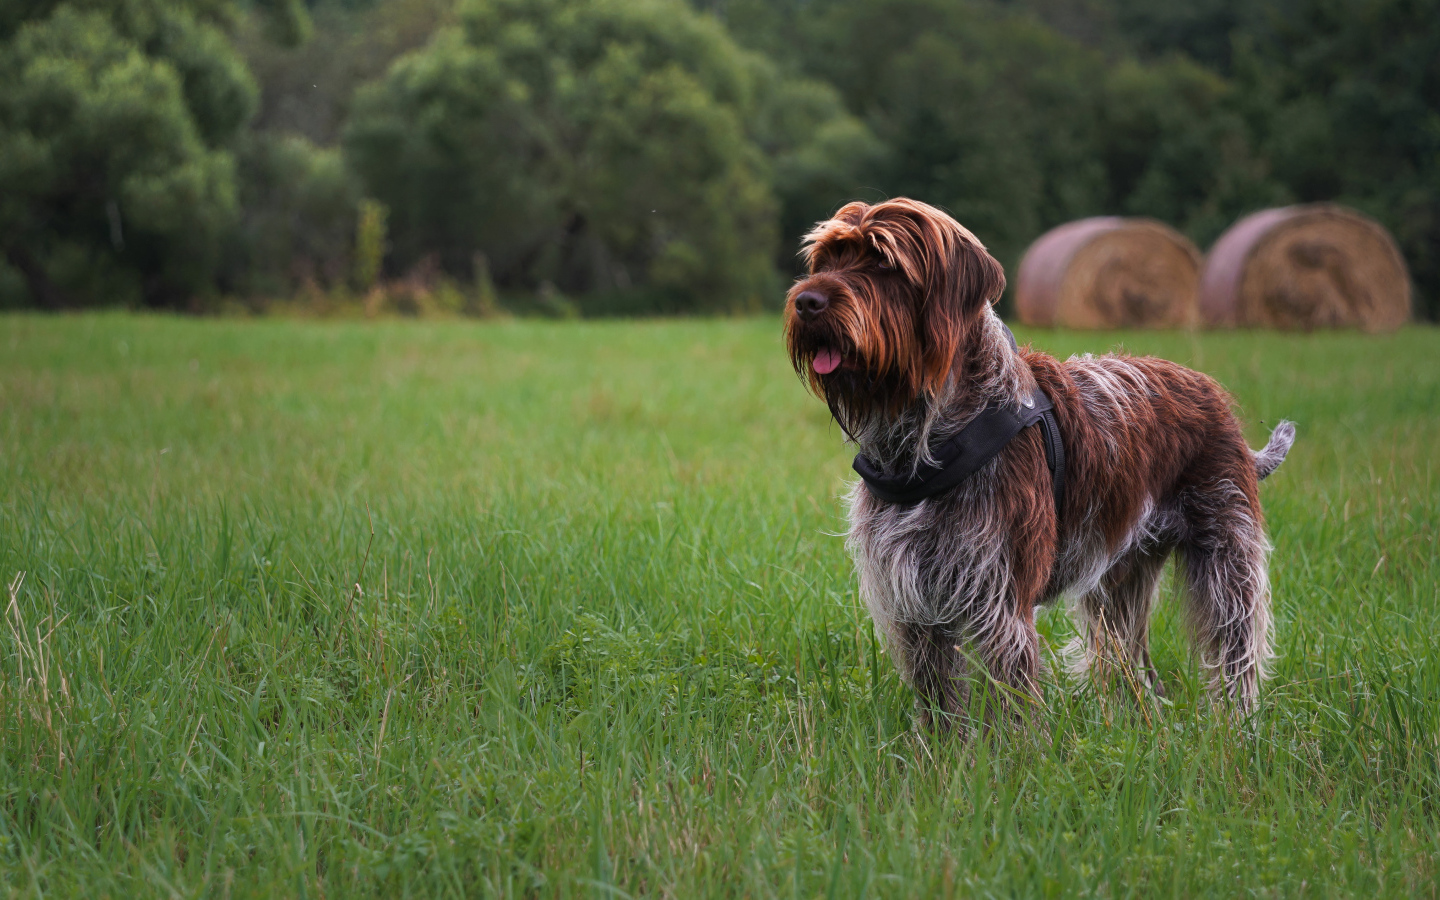 Dog breed Griffon Kortalsa stands in the grass